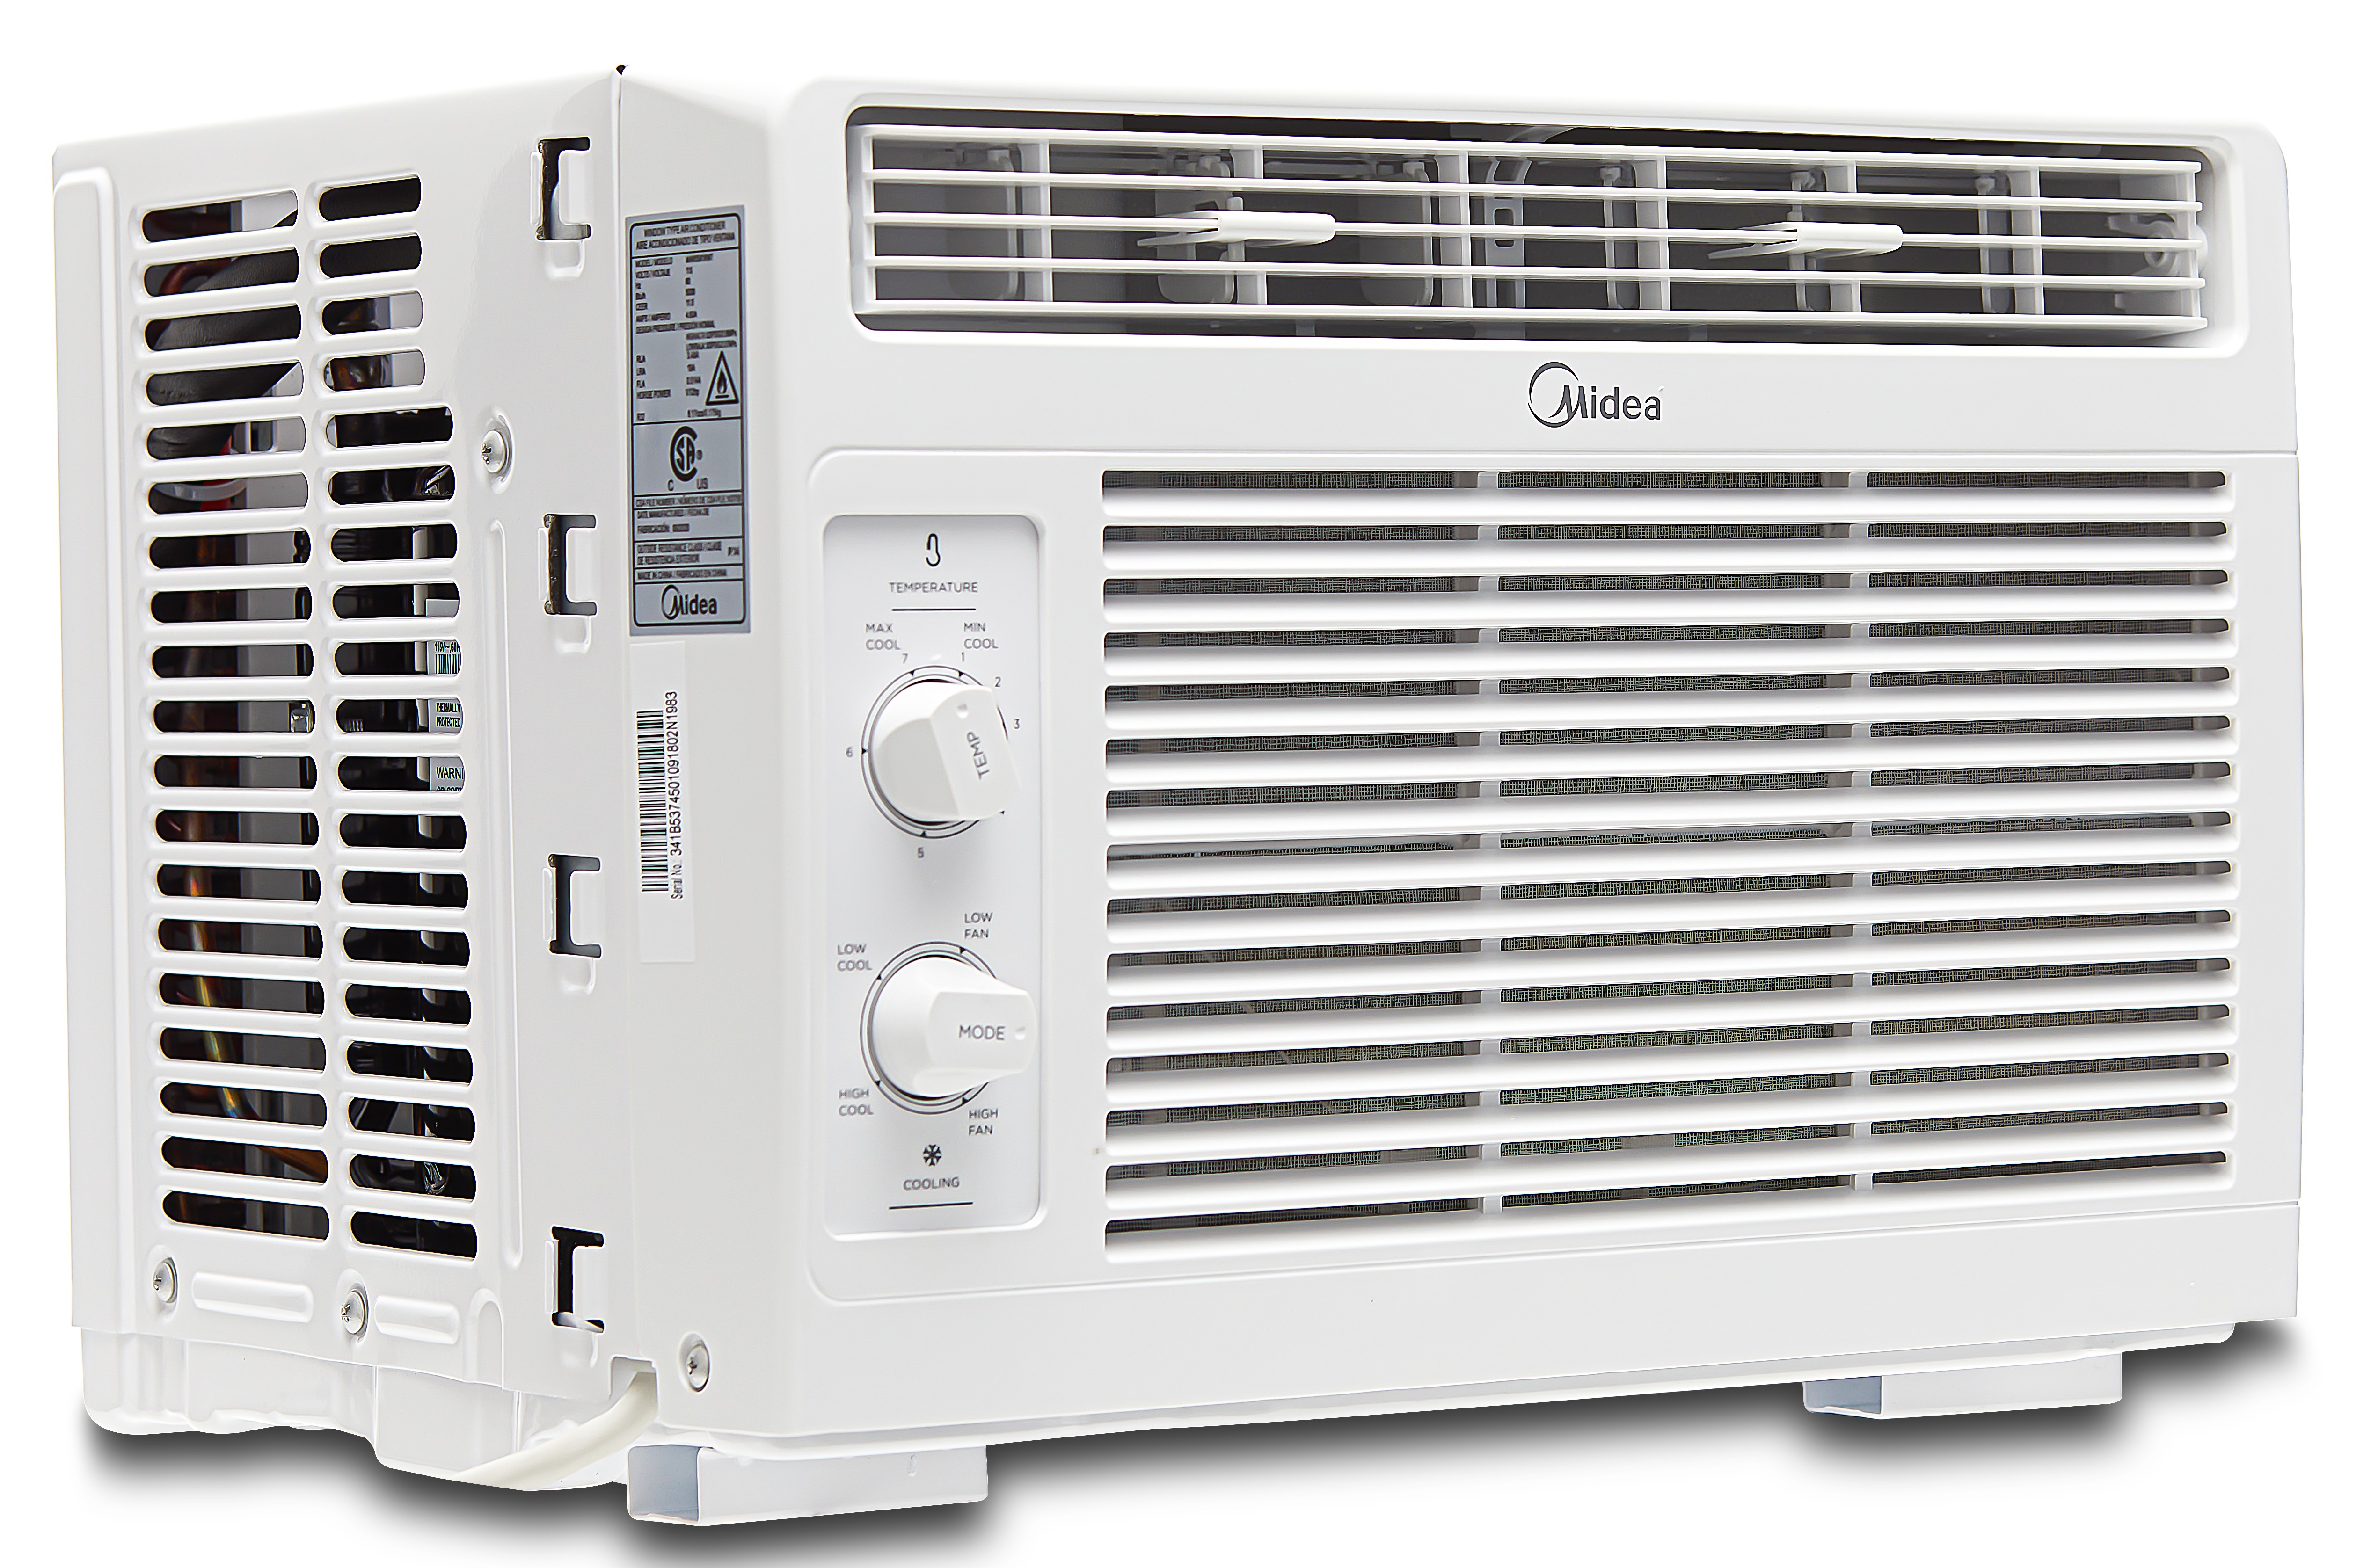 Midea 5,000 BTU 150 Sq Ft Mechanical Window Air Conditioner, White, MAW05M1WWT - image 9 of 17